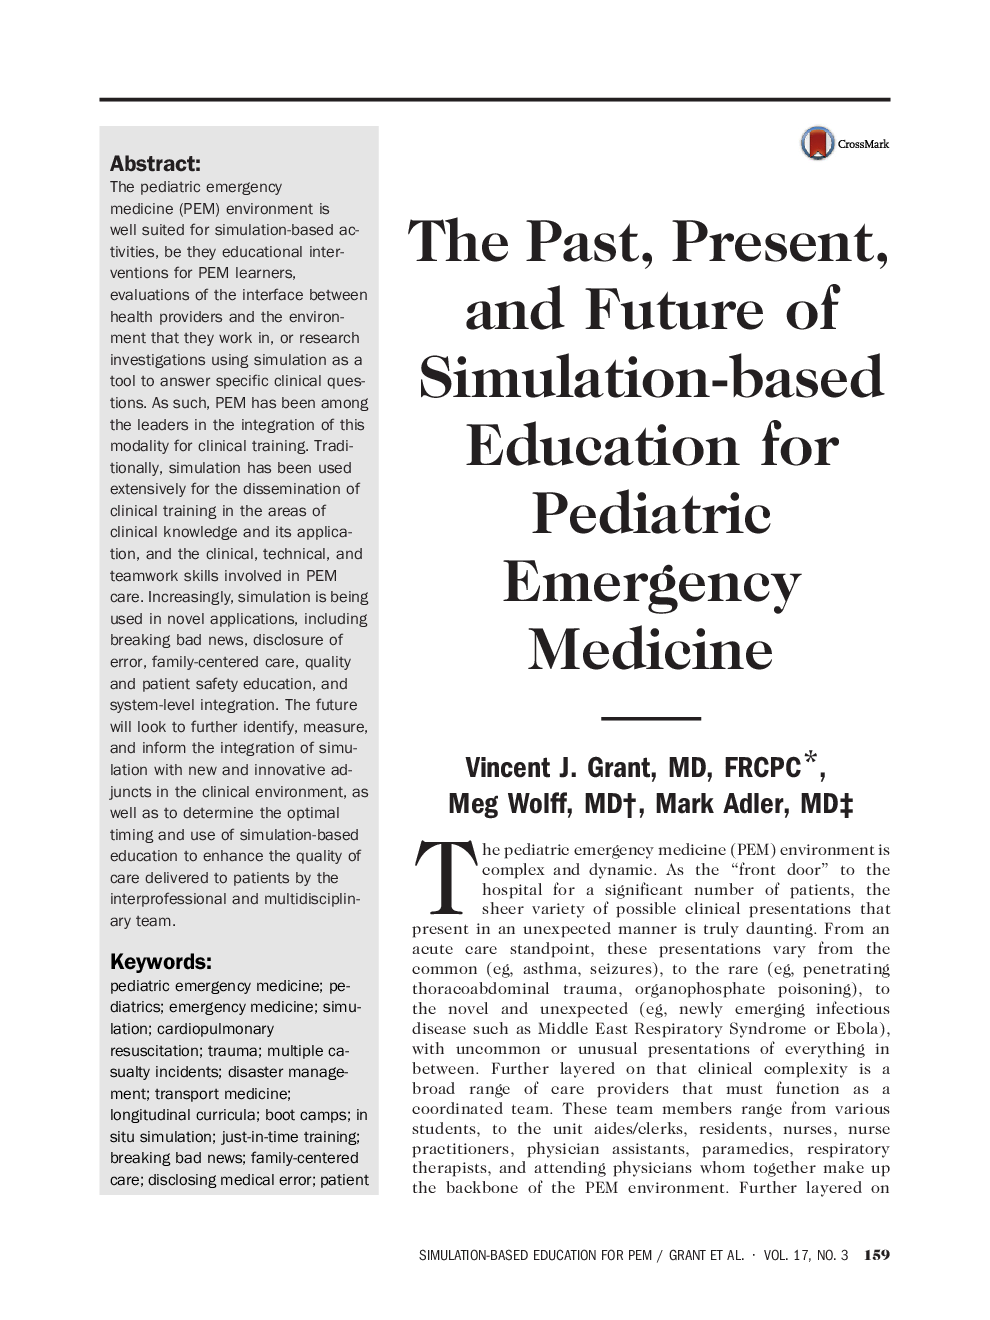 The Past, Present, and Future of Simulation-based Education for Pediatric Emergency Medicine